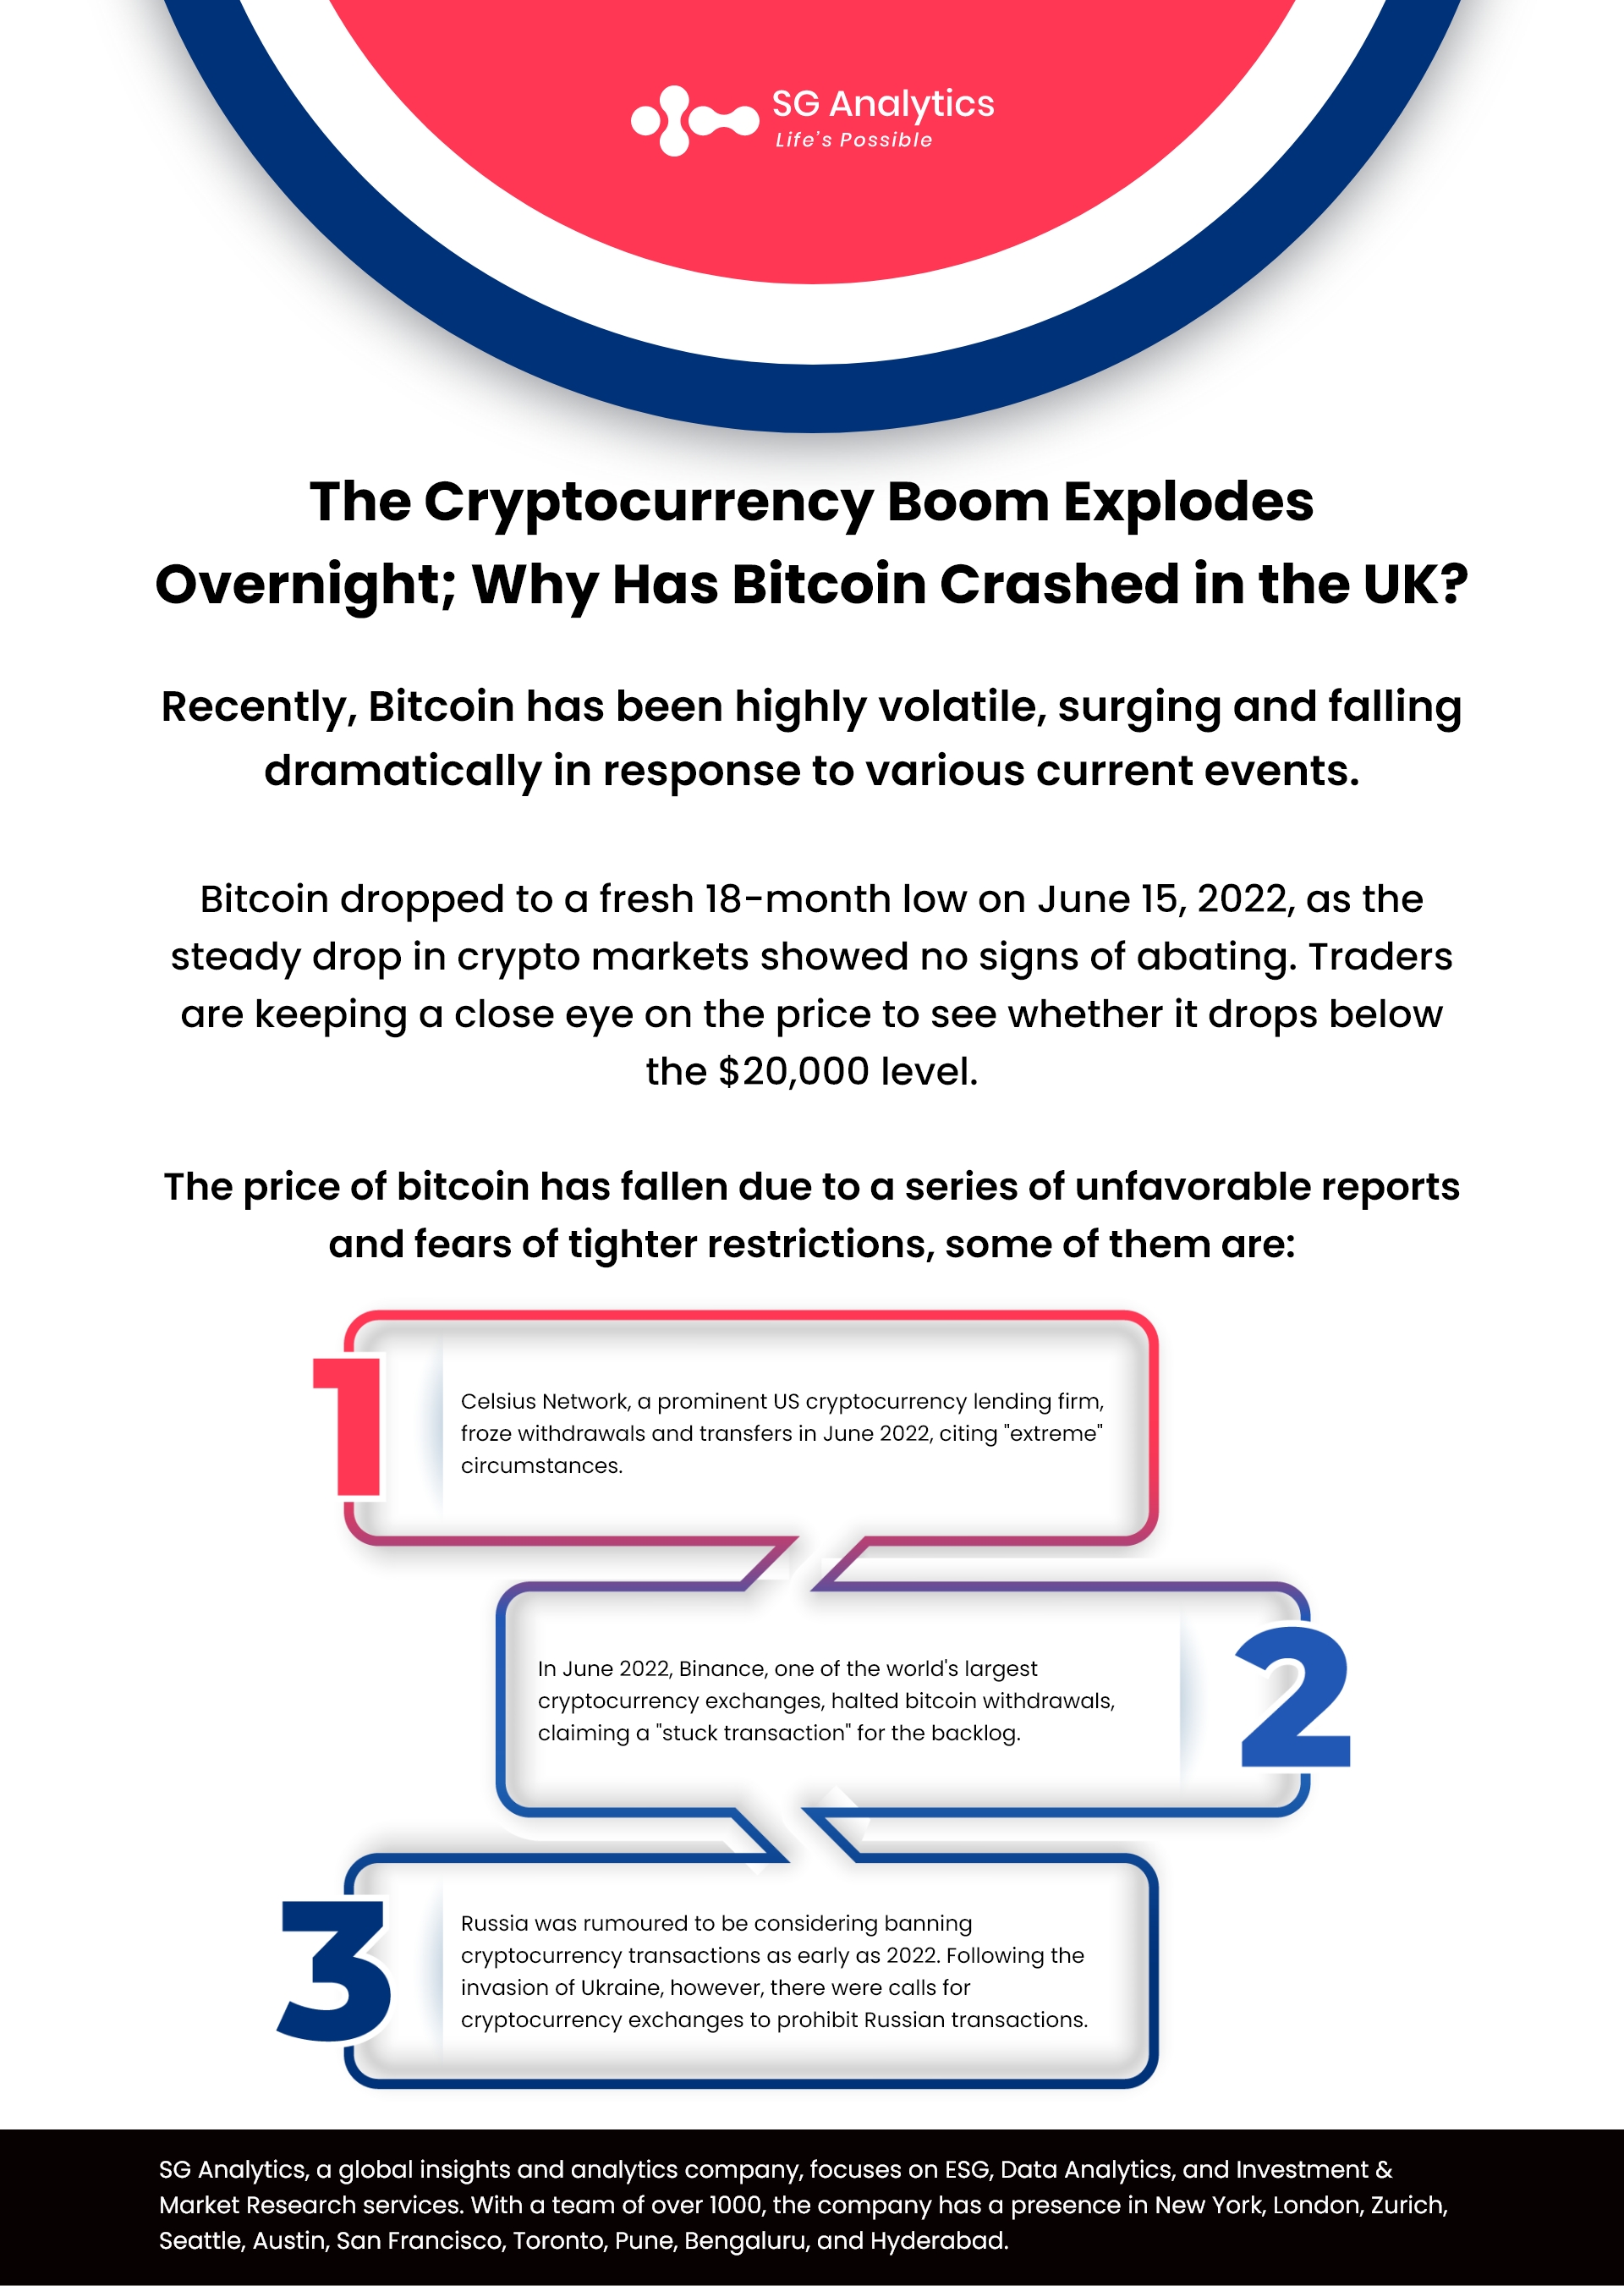 SG Analytics_ The Cryptocurrency Boom Explodes Overnight, Why Has Bitcoin Crashed in the UK